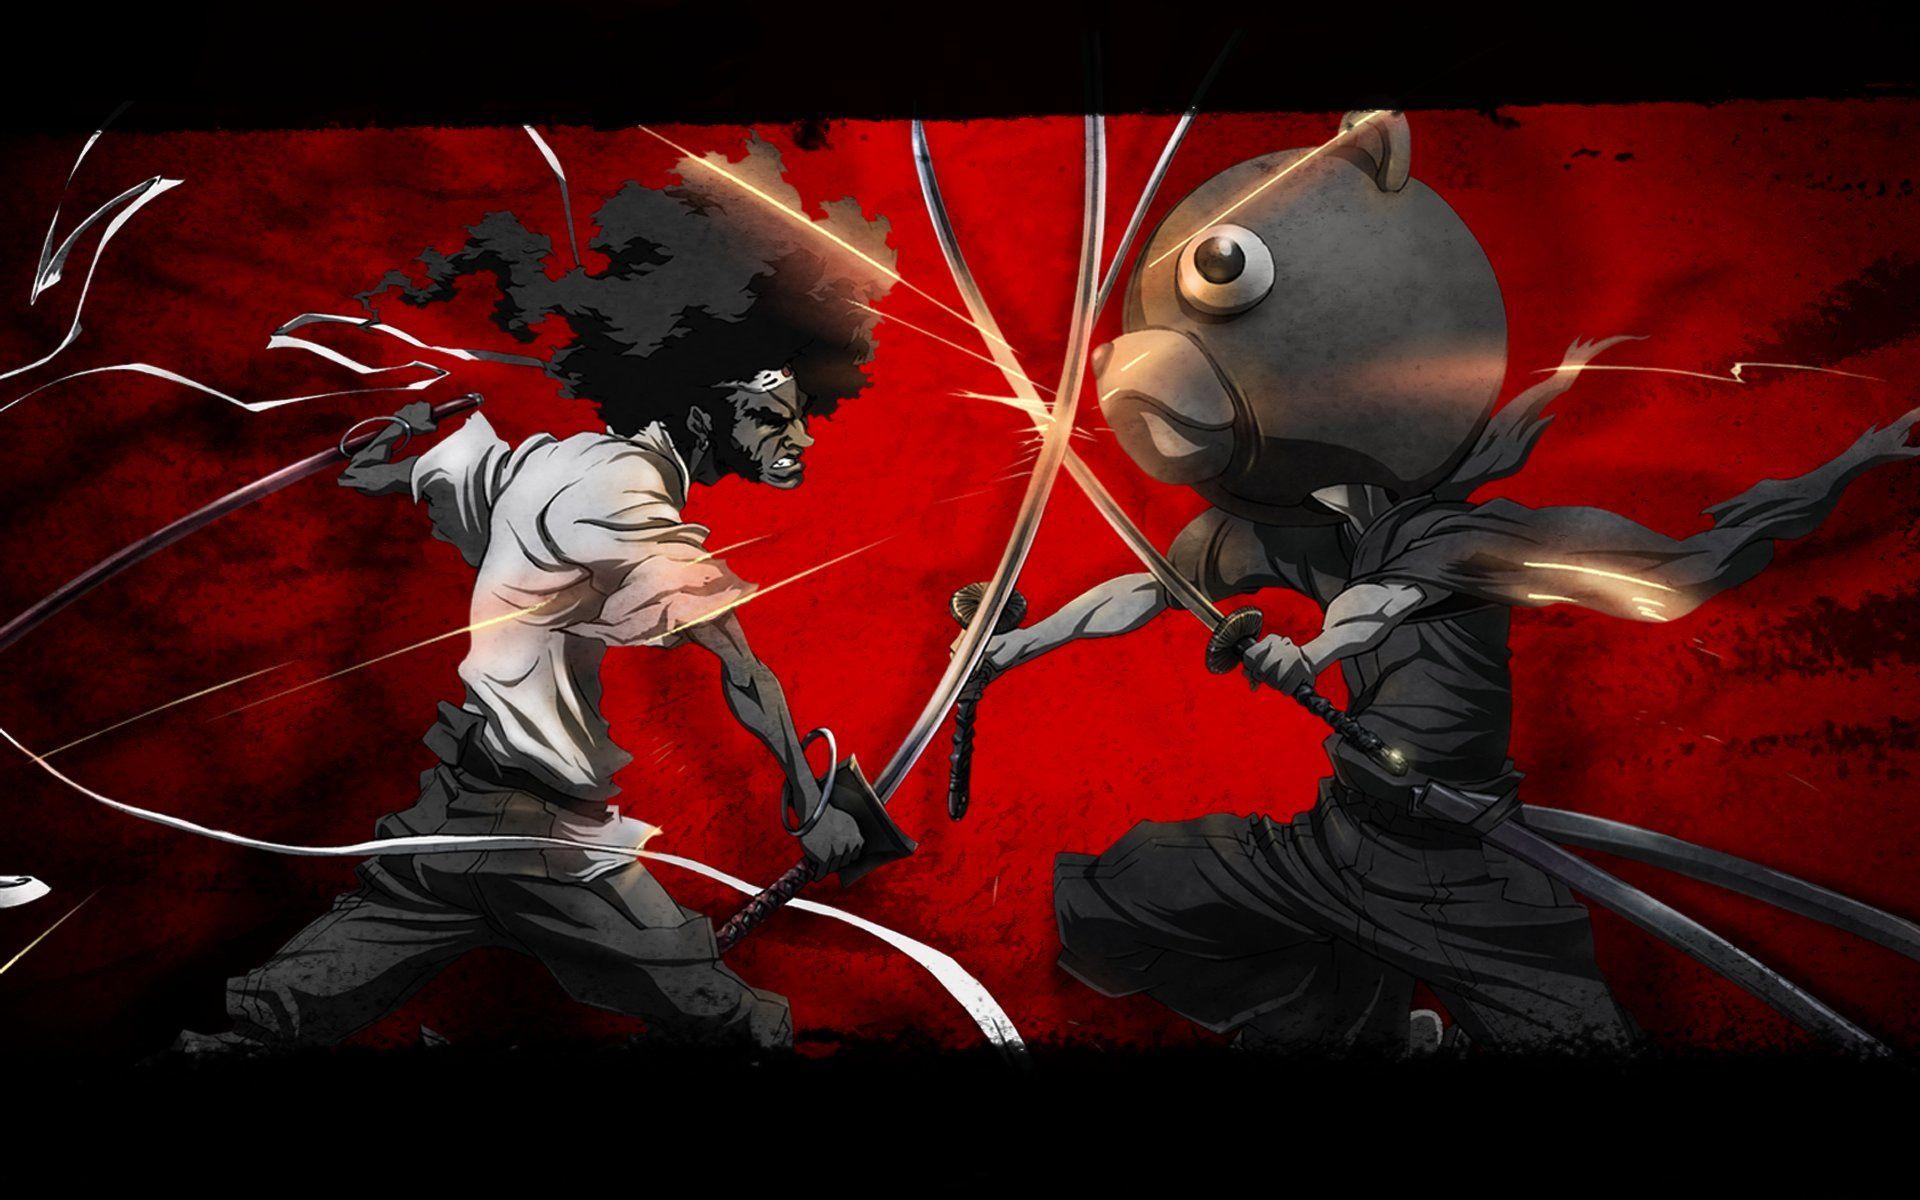 Epic Anime Fighting Wallpaper High Quality Resolution #epic